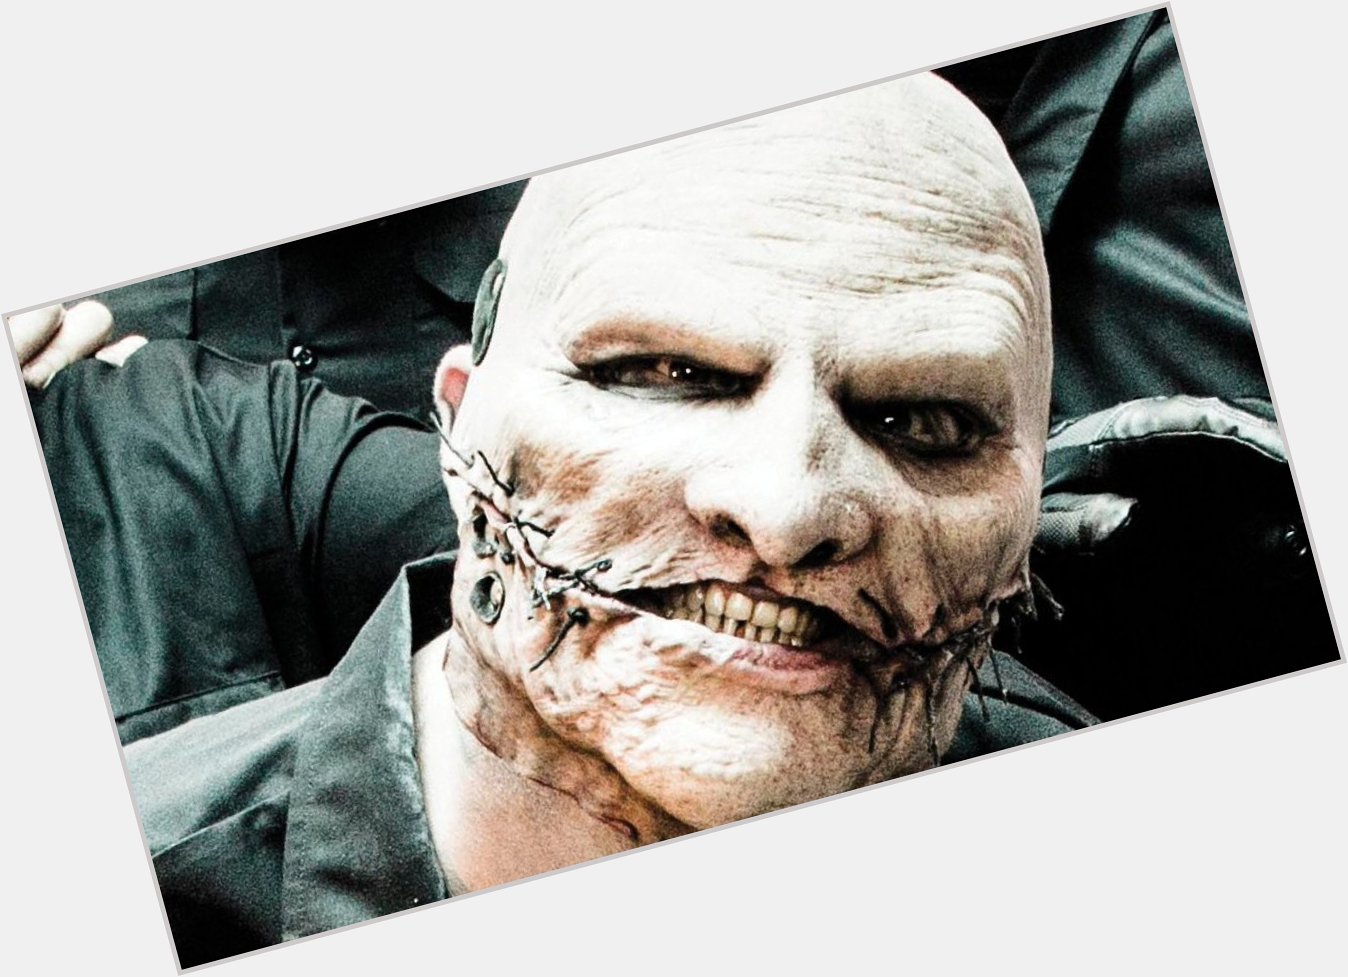 Happy 42nd birthday to Slipknot and Stone Sour vocalist Corey Taylor! Listen today as we go heavy for him! 